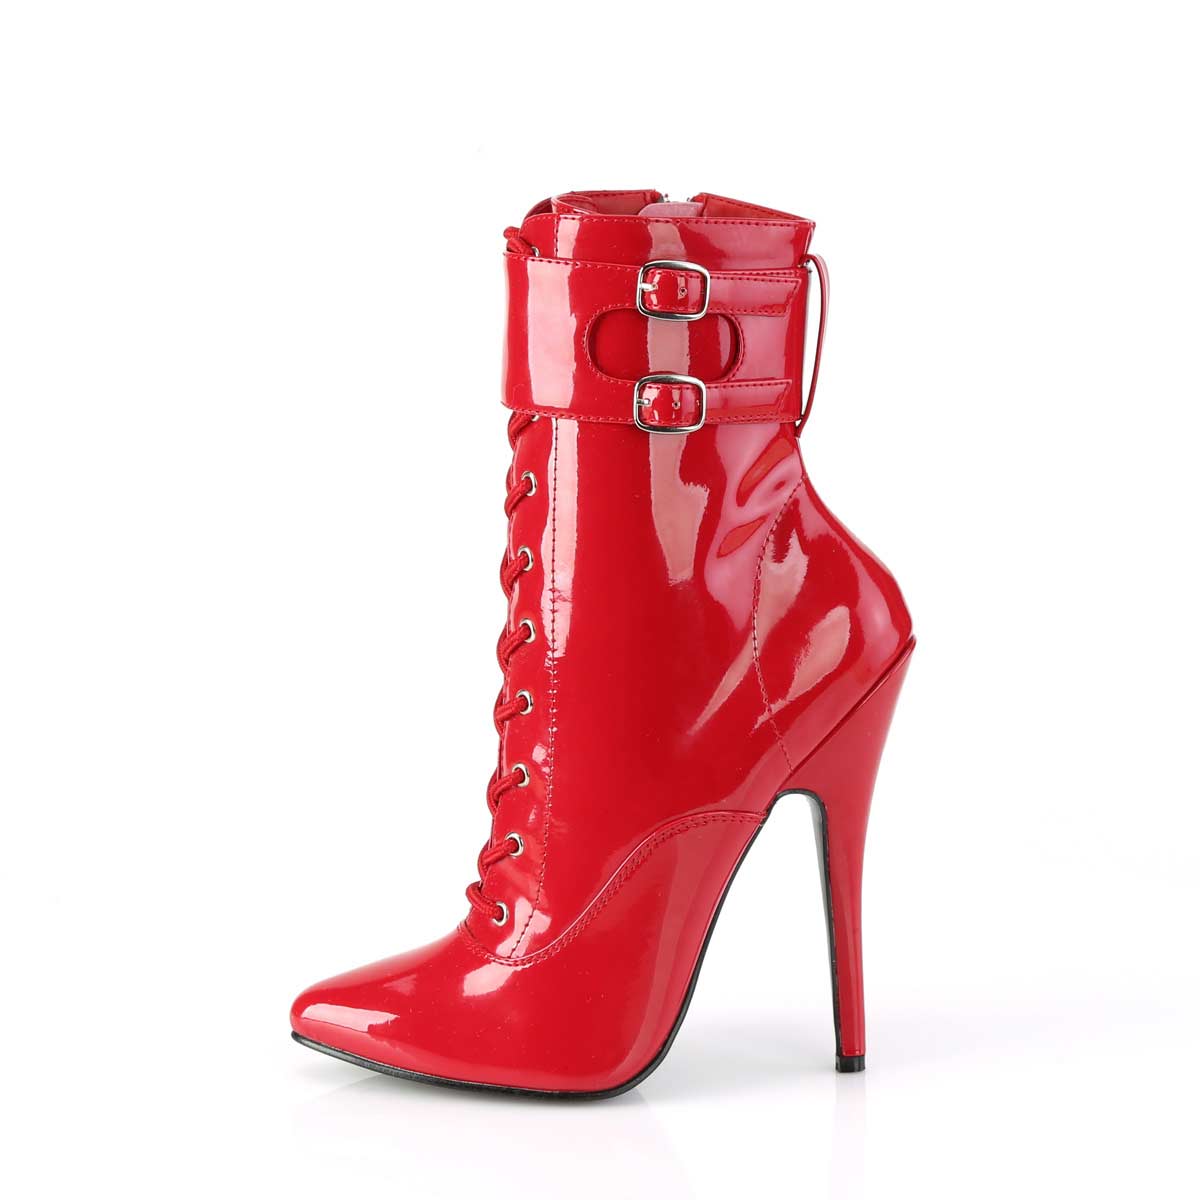 Pleaser Domina-1023 - Red Patent in Sexy Boots - $76.55